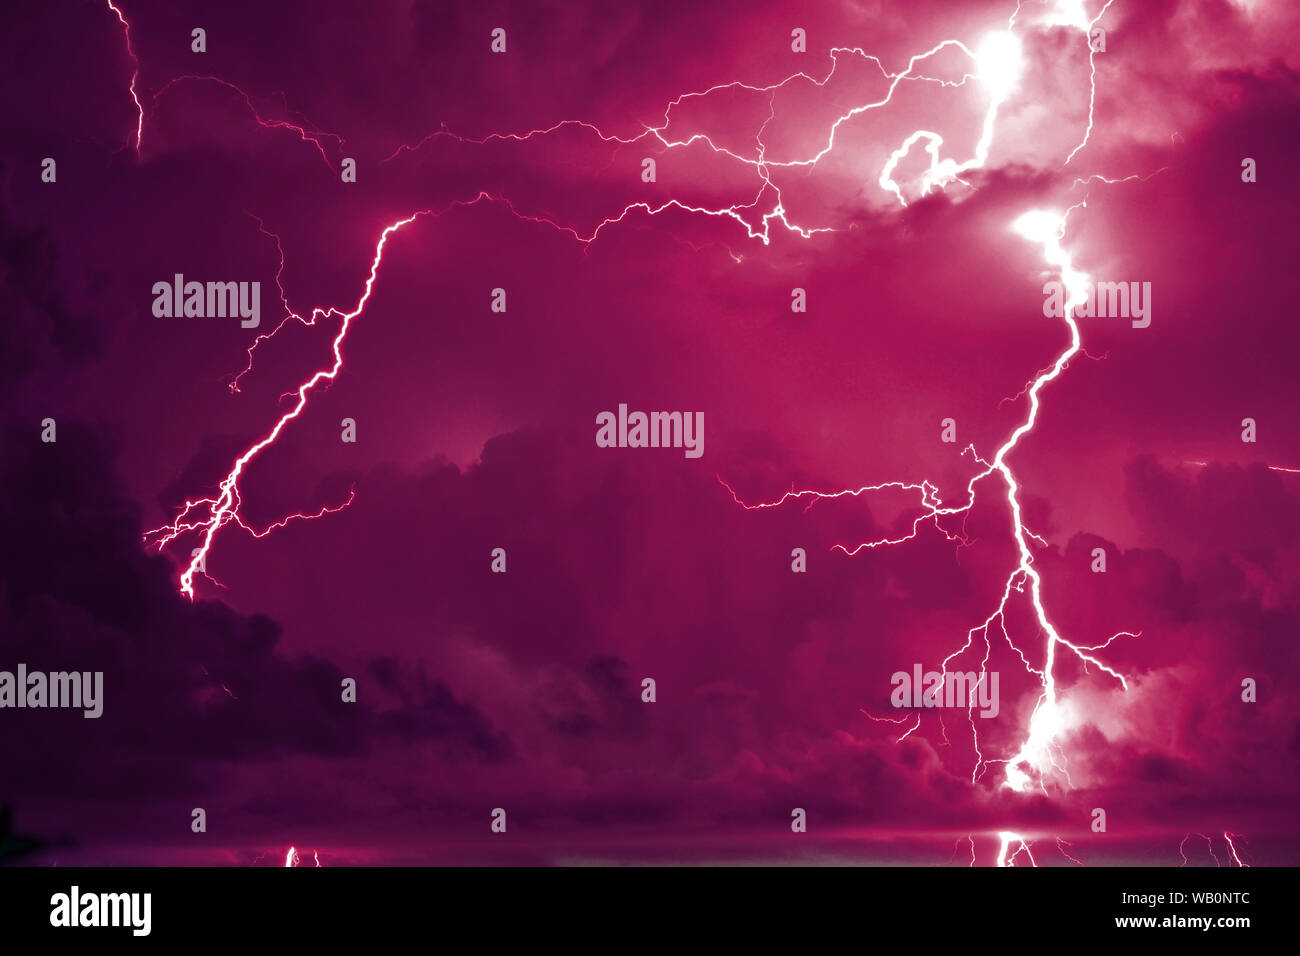 11,874 Real Lightning Images, Stock Photos, 3D objects, & Vectors